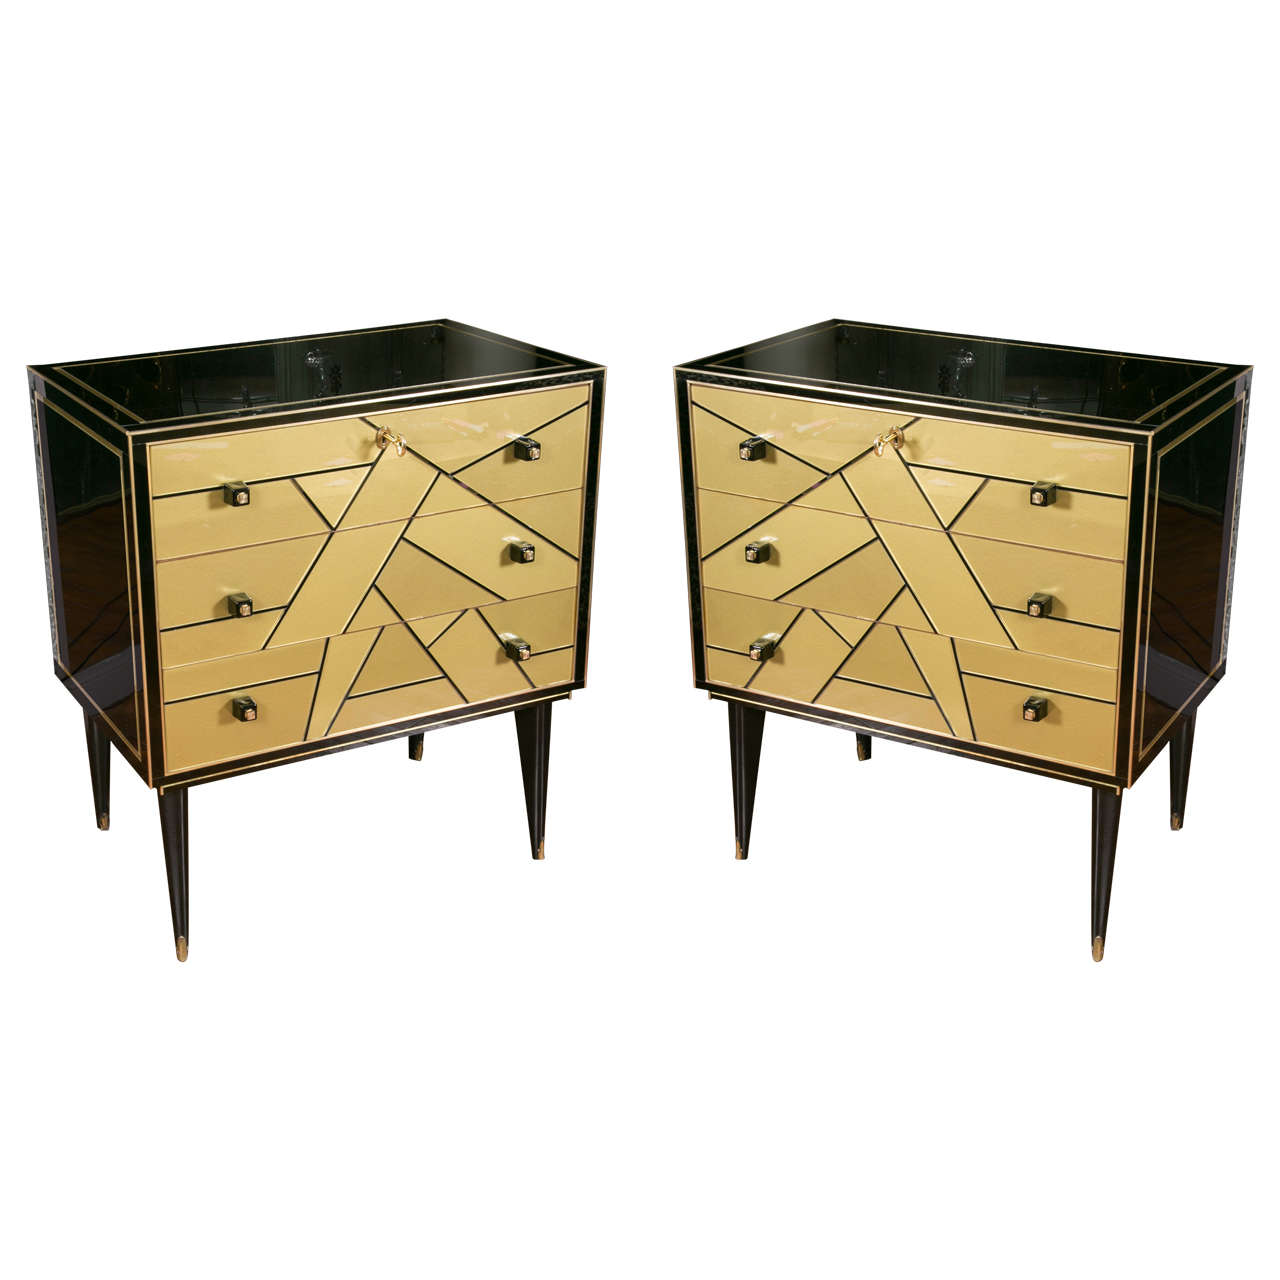 Pair of Black and Gold Mirrored Commodes